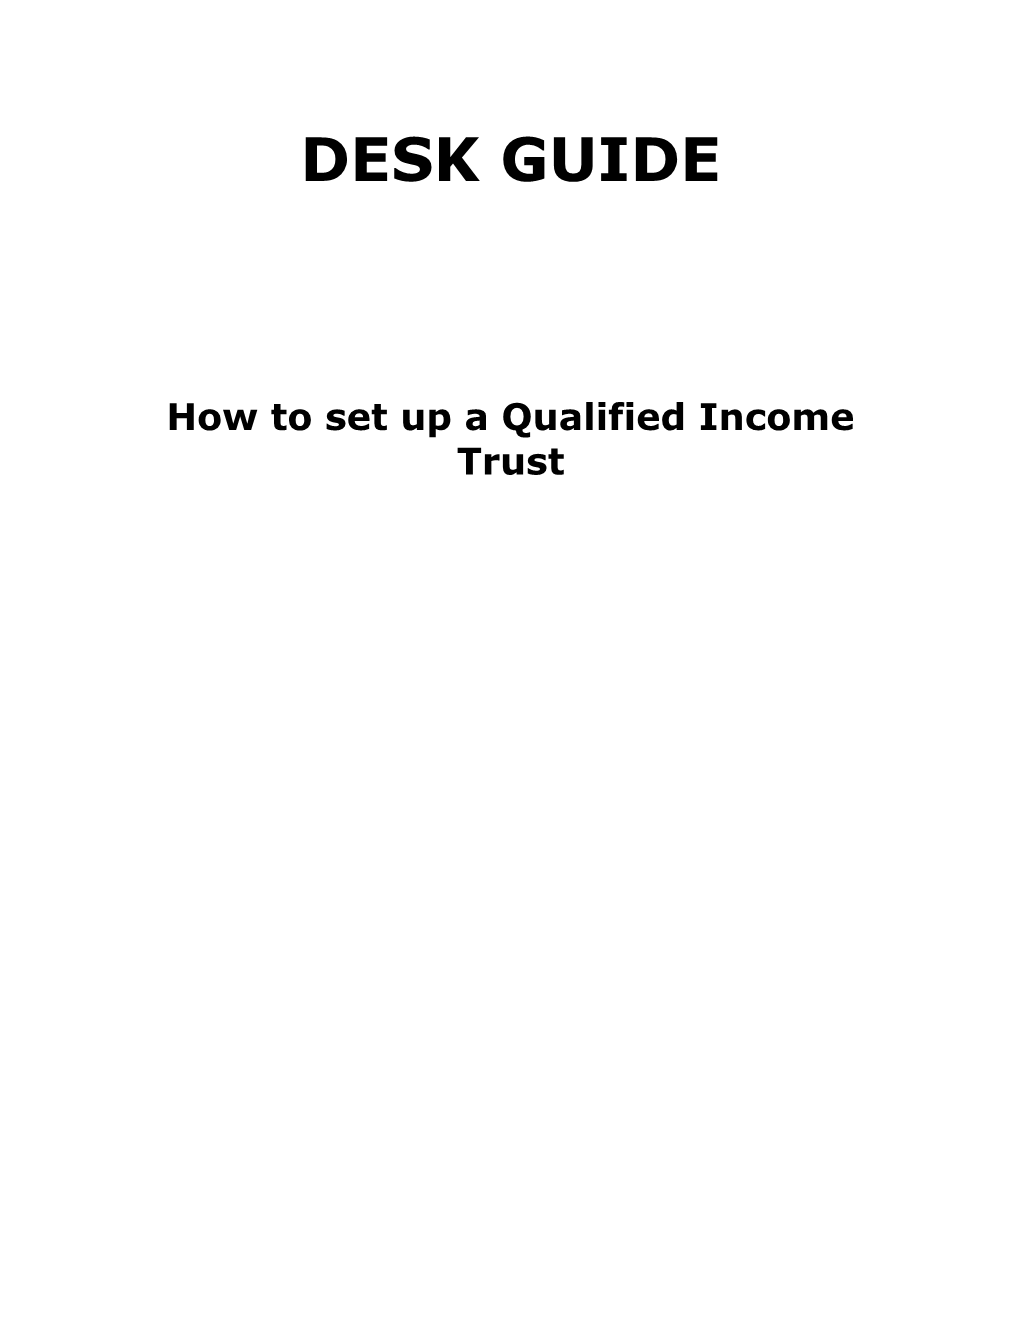 Qualified Income Trusts